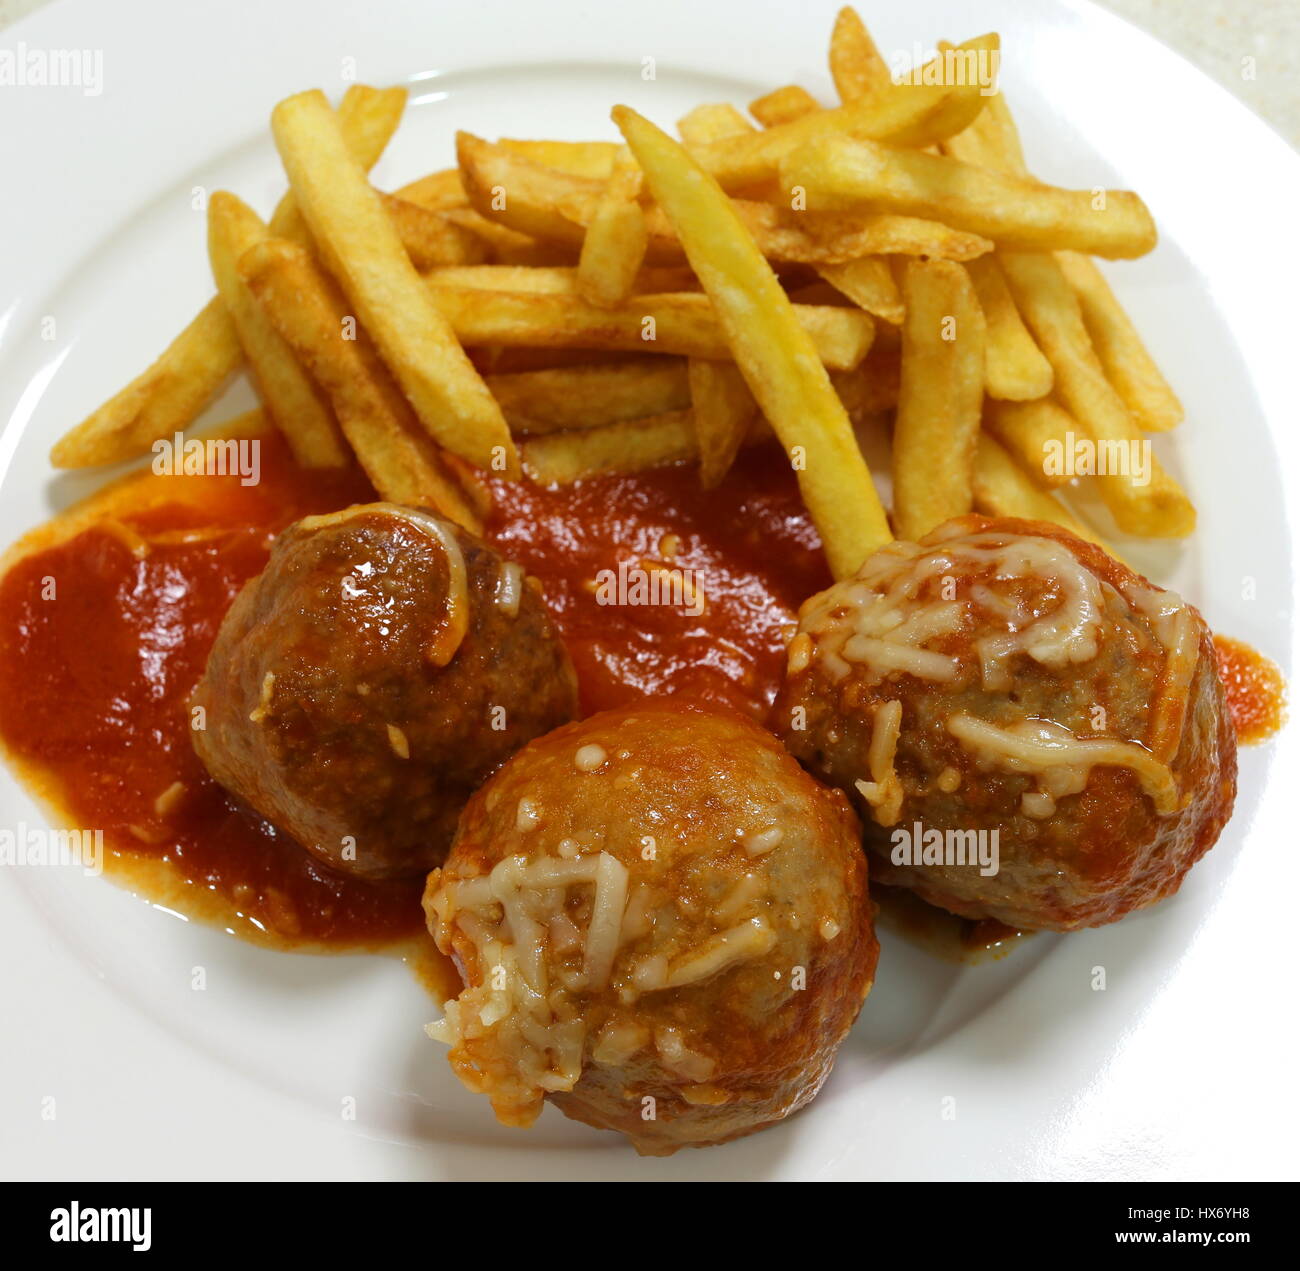 Homemade meatballs in sauce served with fries Stock Photo